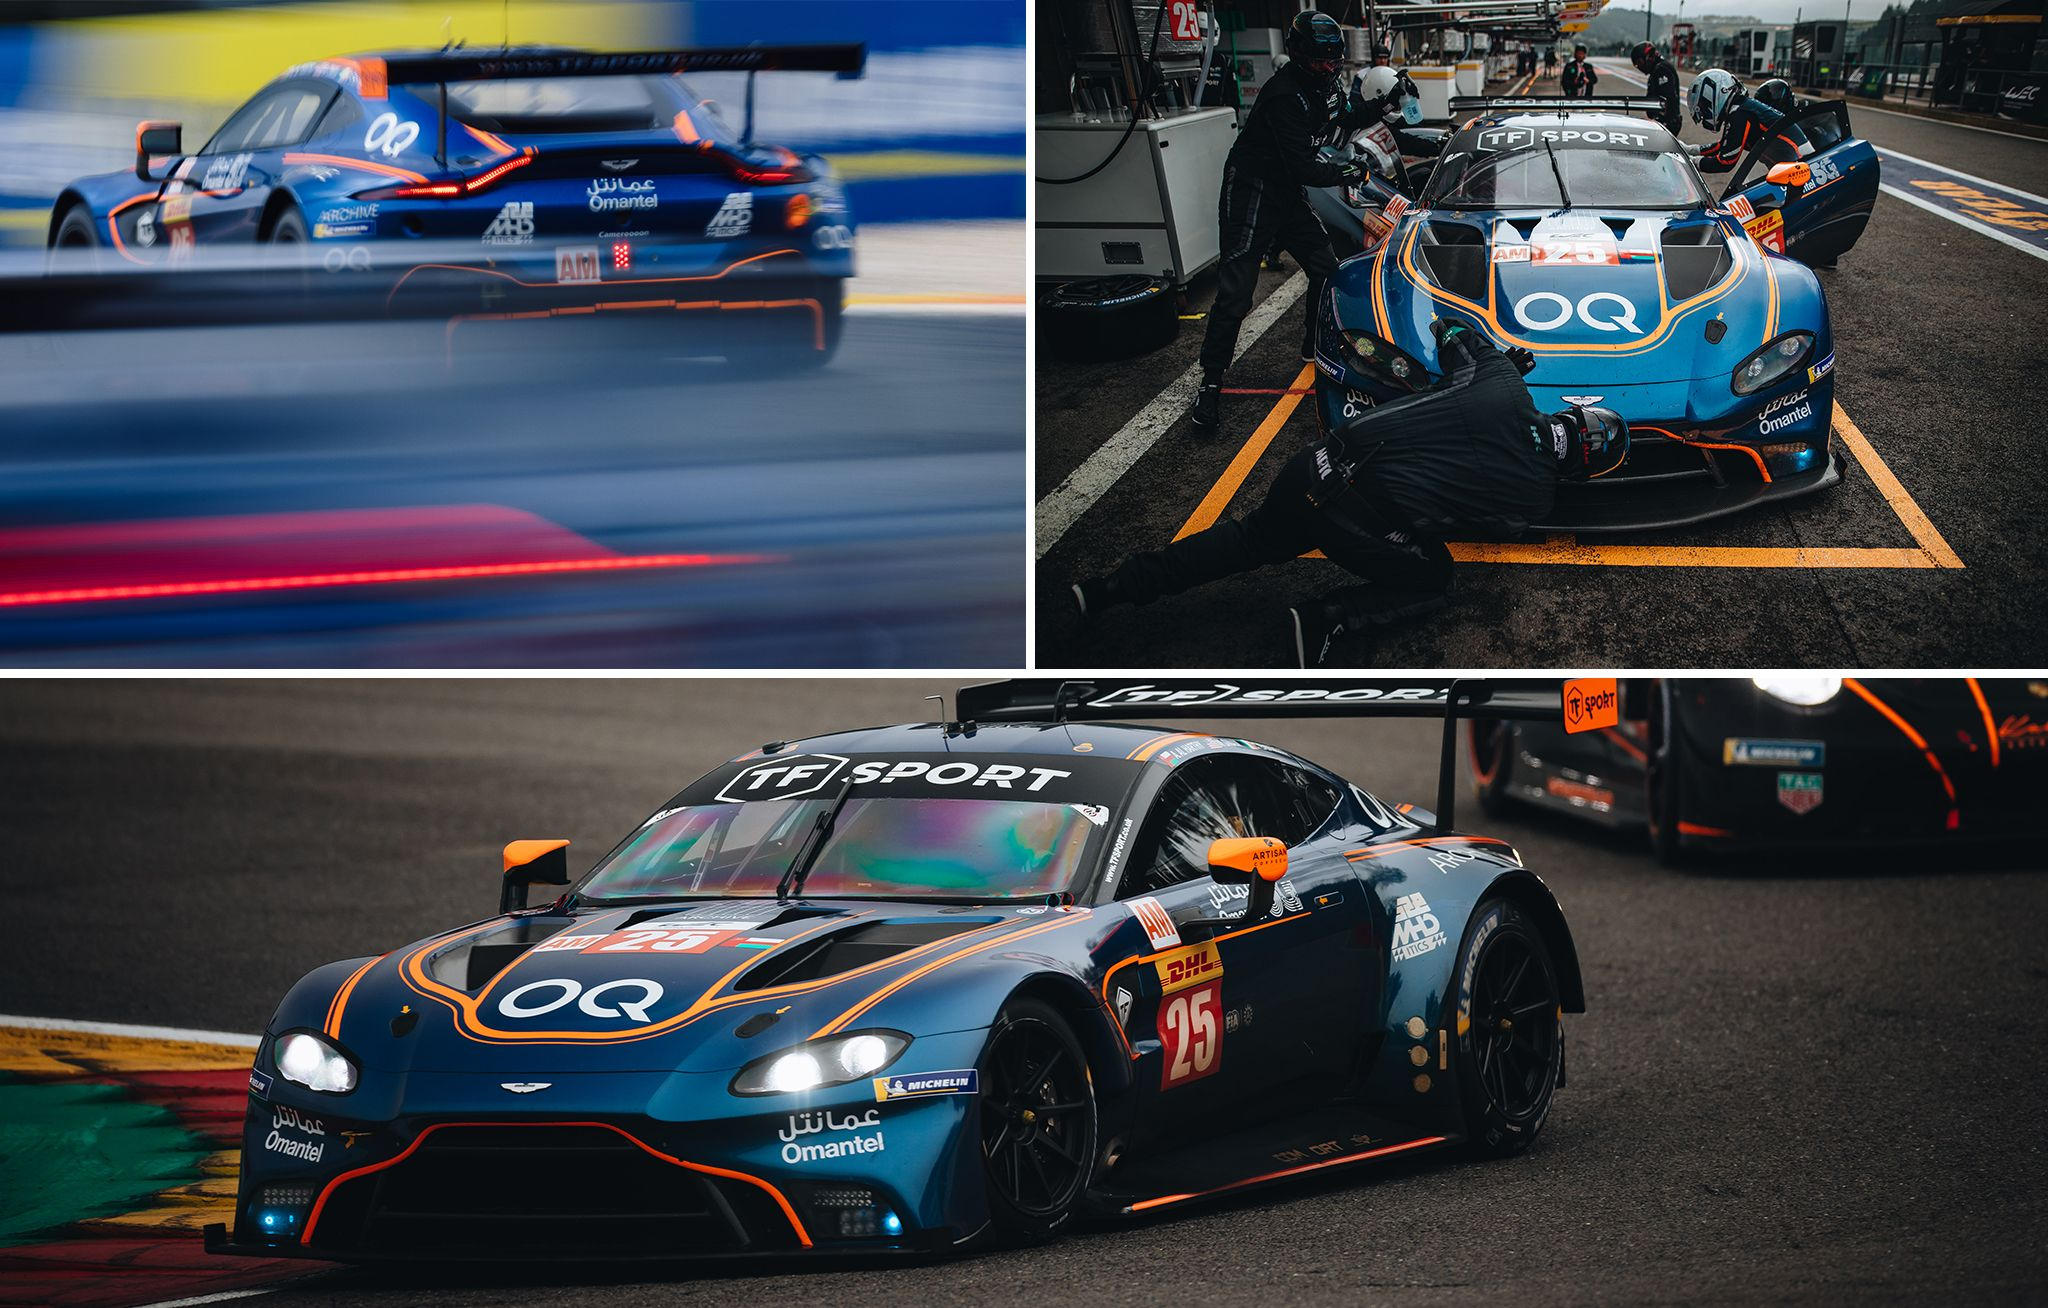 as ORT by TF makes history at 6 Hours of Spa - Vantage back on FIA World Endurance Championship podium - cChic Magazine Suisse